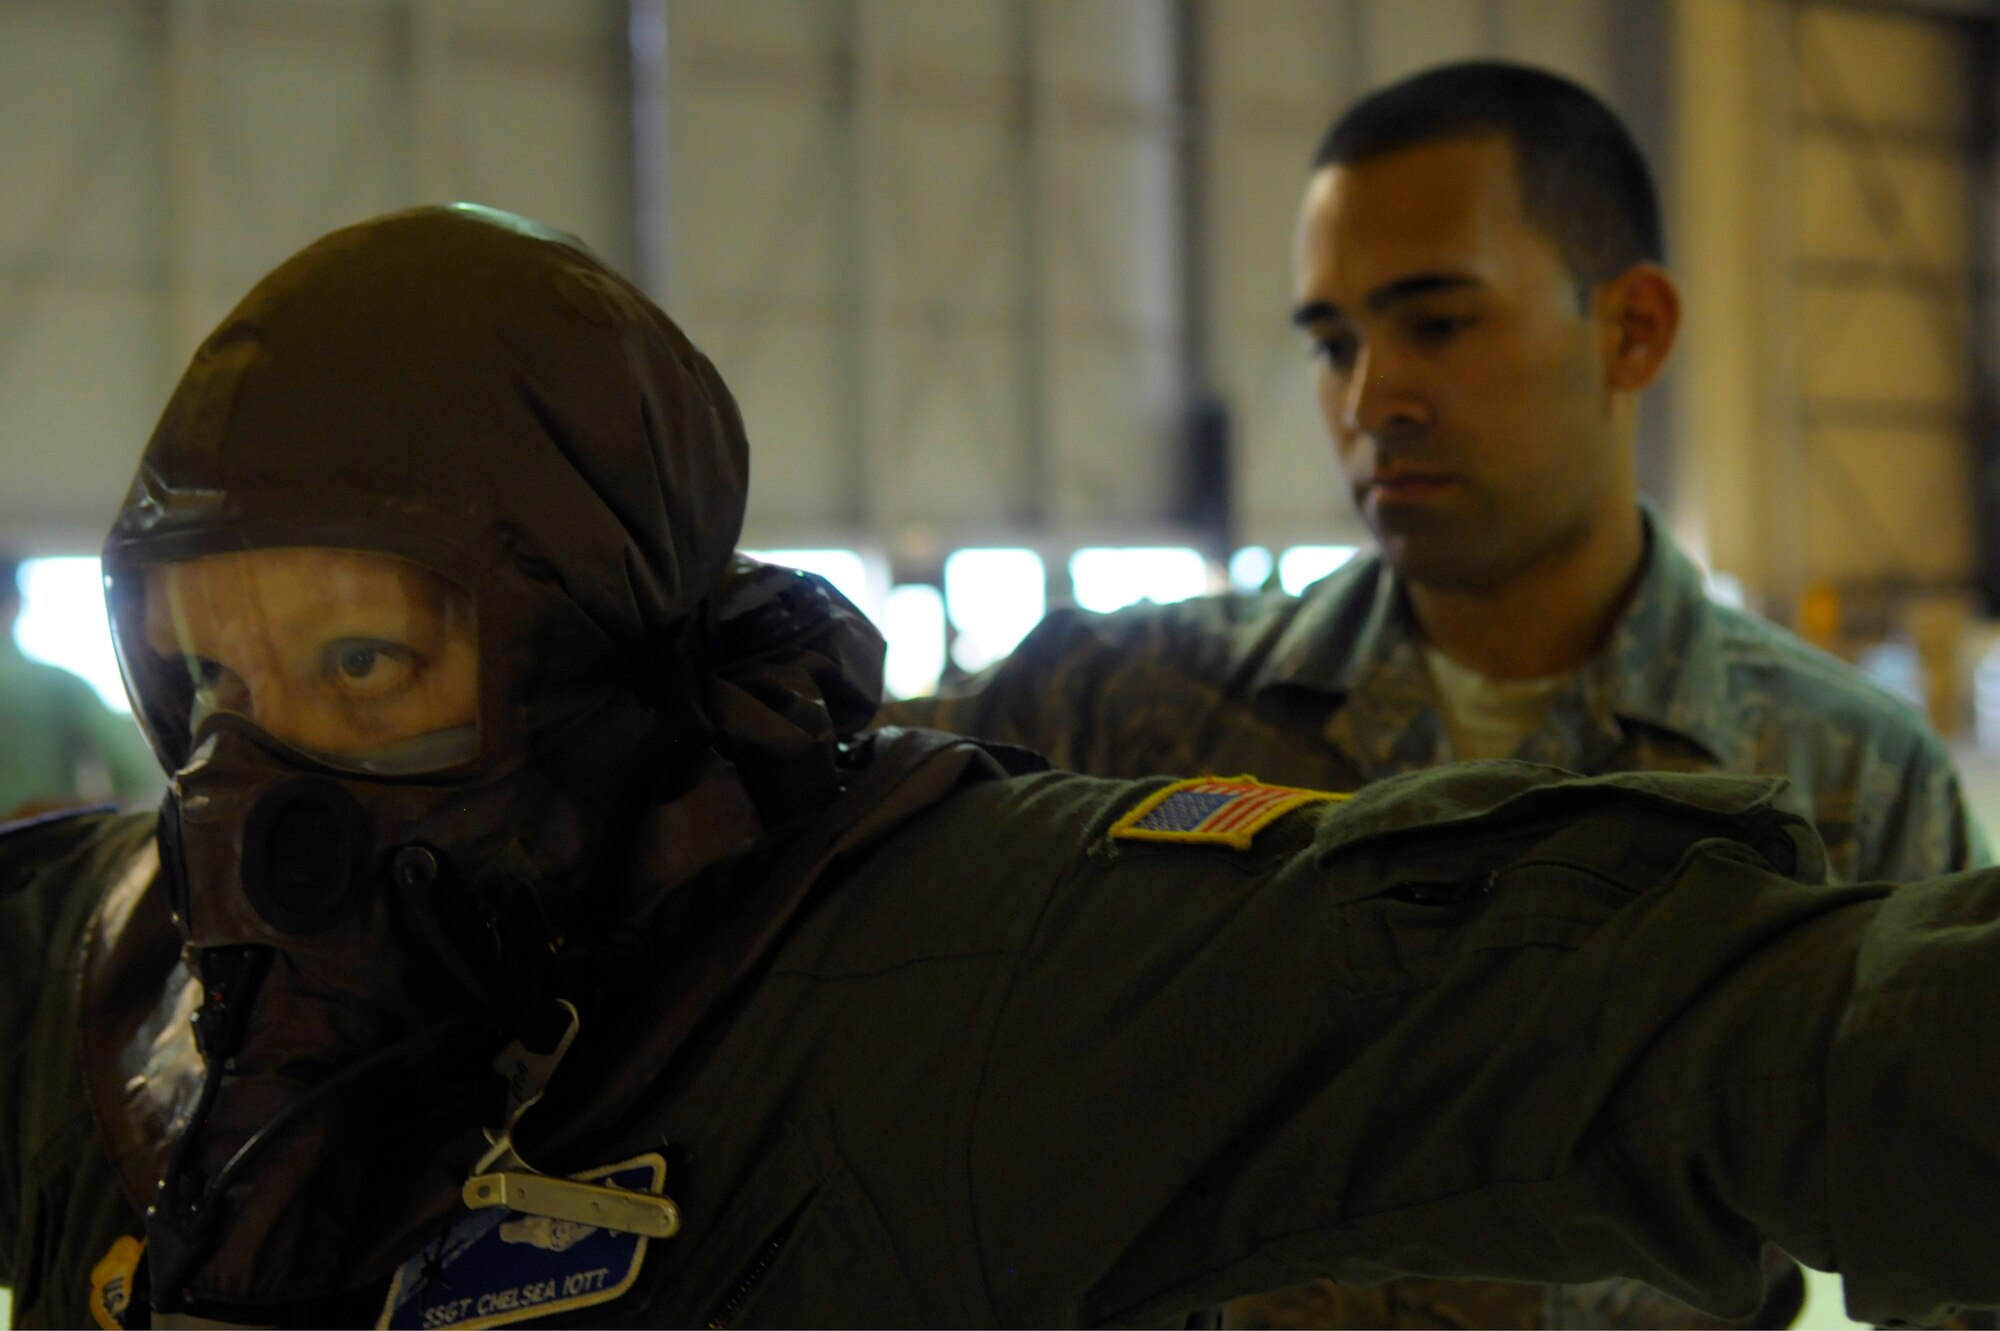 Staff Sgt. Chelsea Iott (left), 37th Airlift Squadron loadmaster, holds her arms up while Senior Airman Daniele Vezza (right), 86th Operation Support Squadron aircrew flight equipment technician, simulates checking her for chemical agents during a chemical-decontamination exercise here April 9. The 86th OSS sets up aircrew contamination control area lines in order to become familiar with the equipment and know what to do and expect in a chemical, biological, radiological or nuclear environment. (U.S. Air Force photo/Airman 1st Class Hailey Haux) 